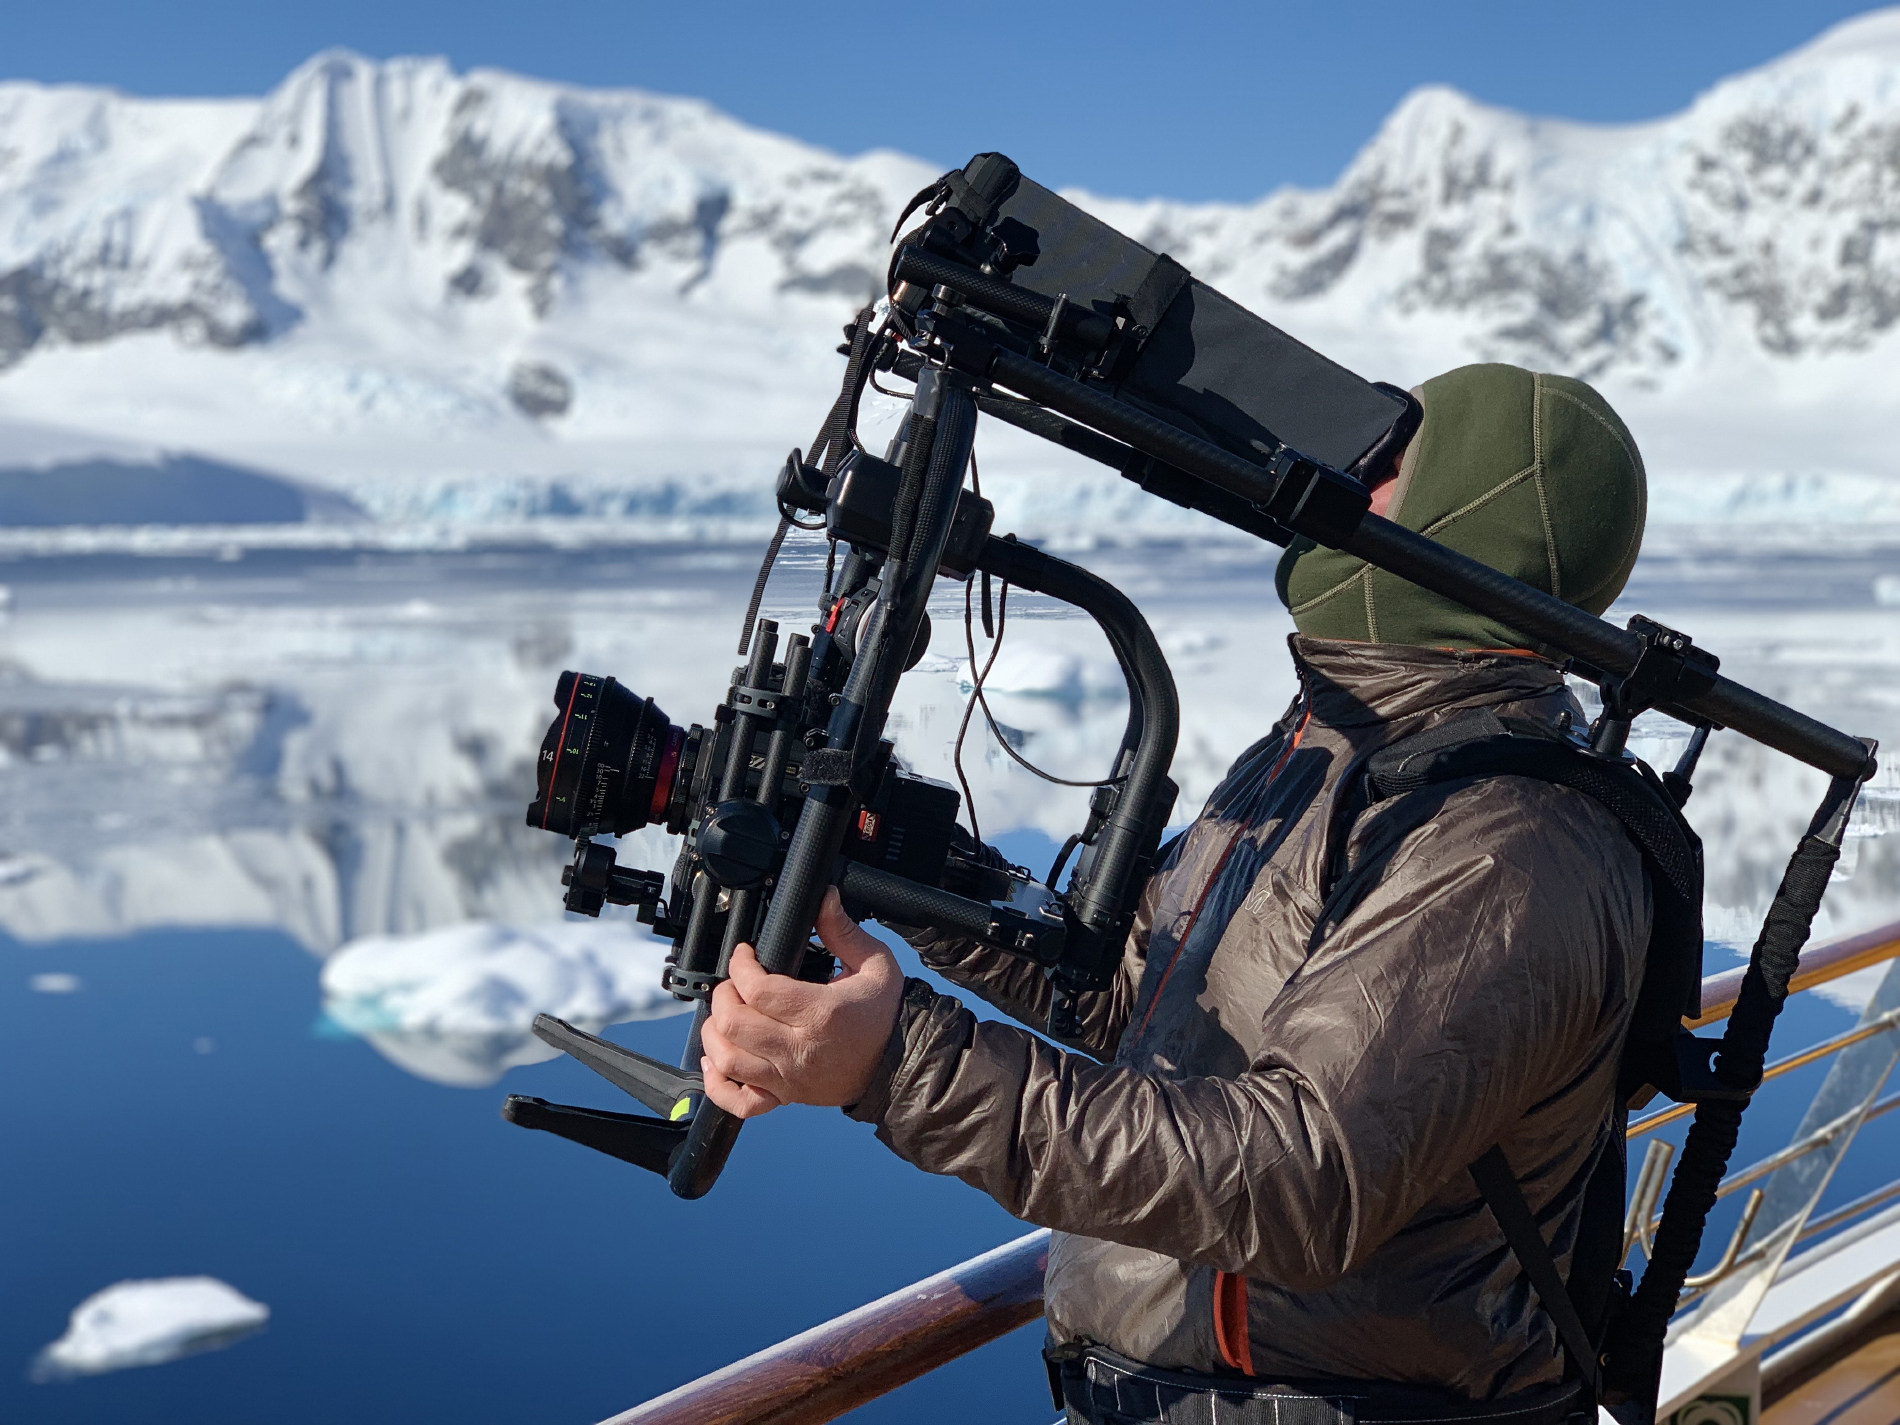 RED Raven & Ready rig - Antarctica